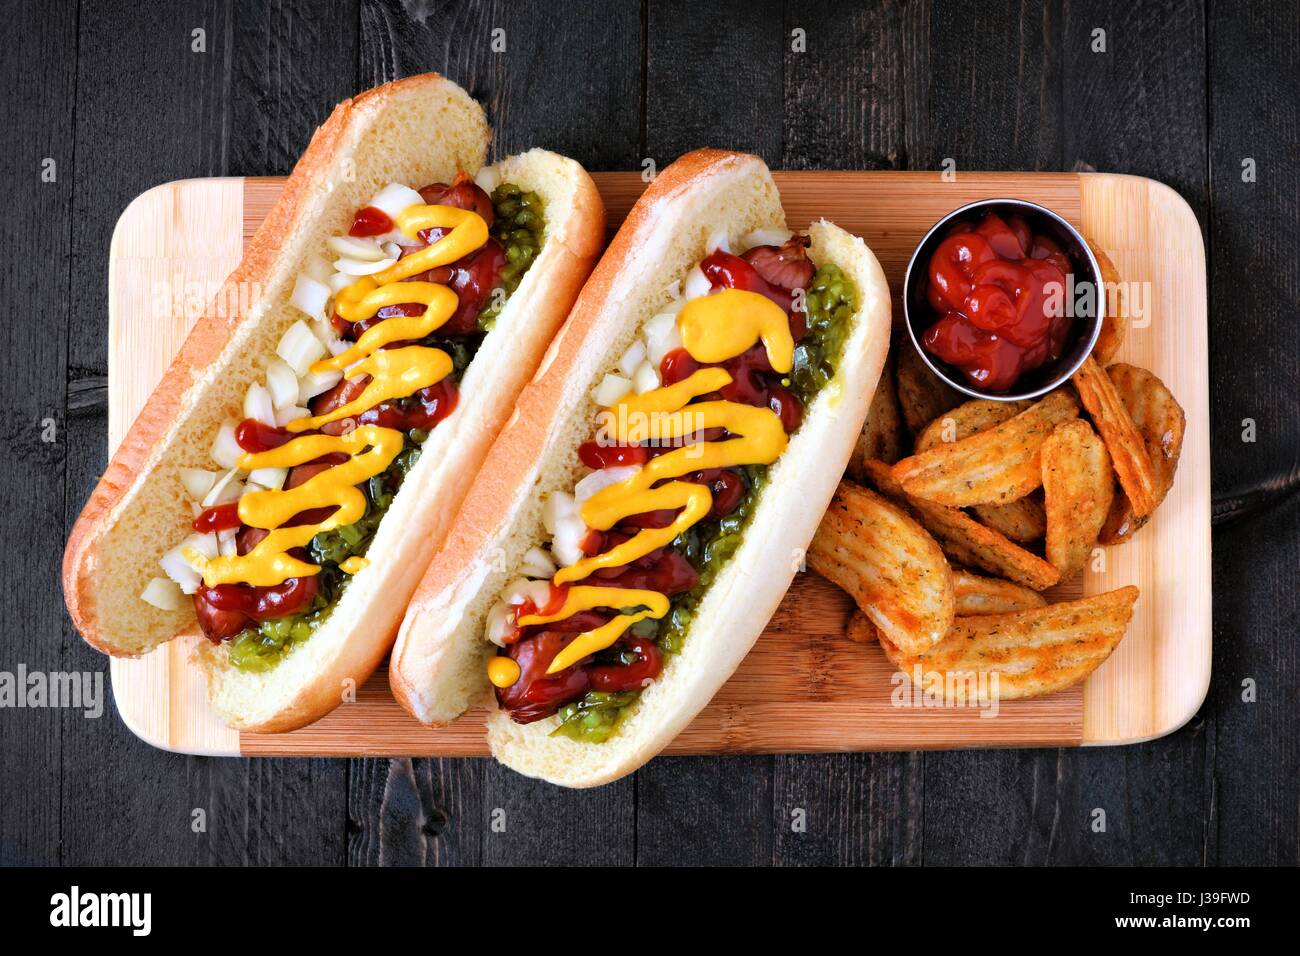 Two hot dogs fully loaded with toppings and potato wedges on wooden board, overhead view Stock Photo